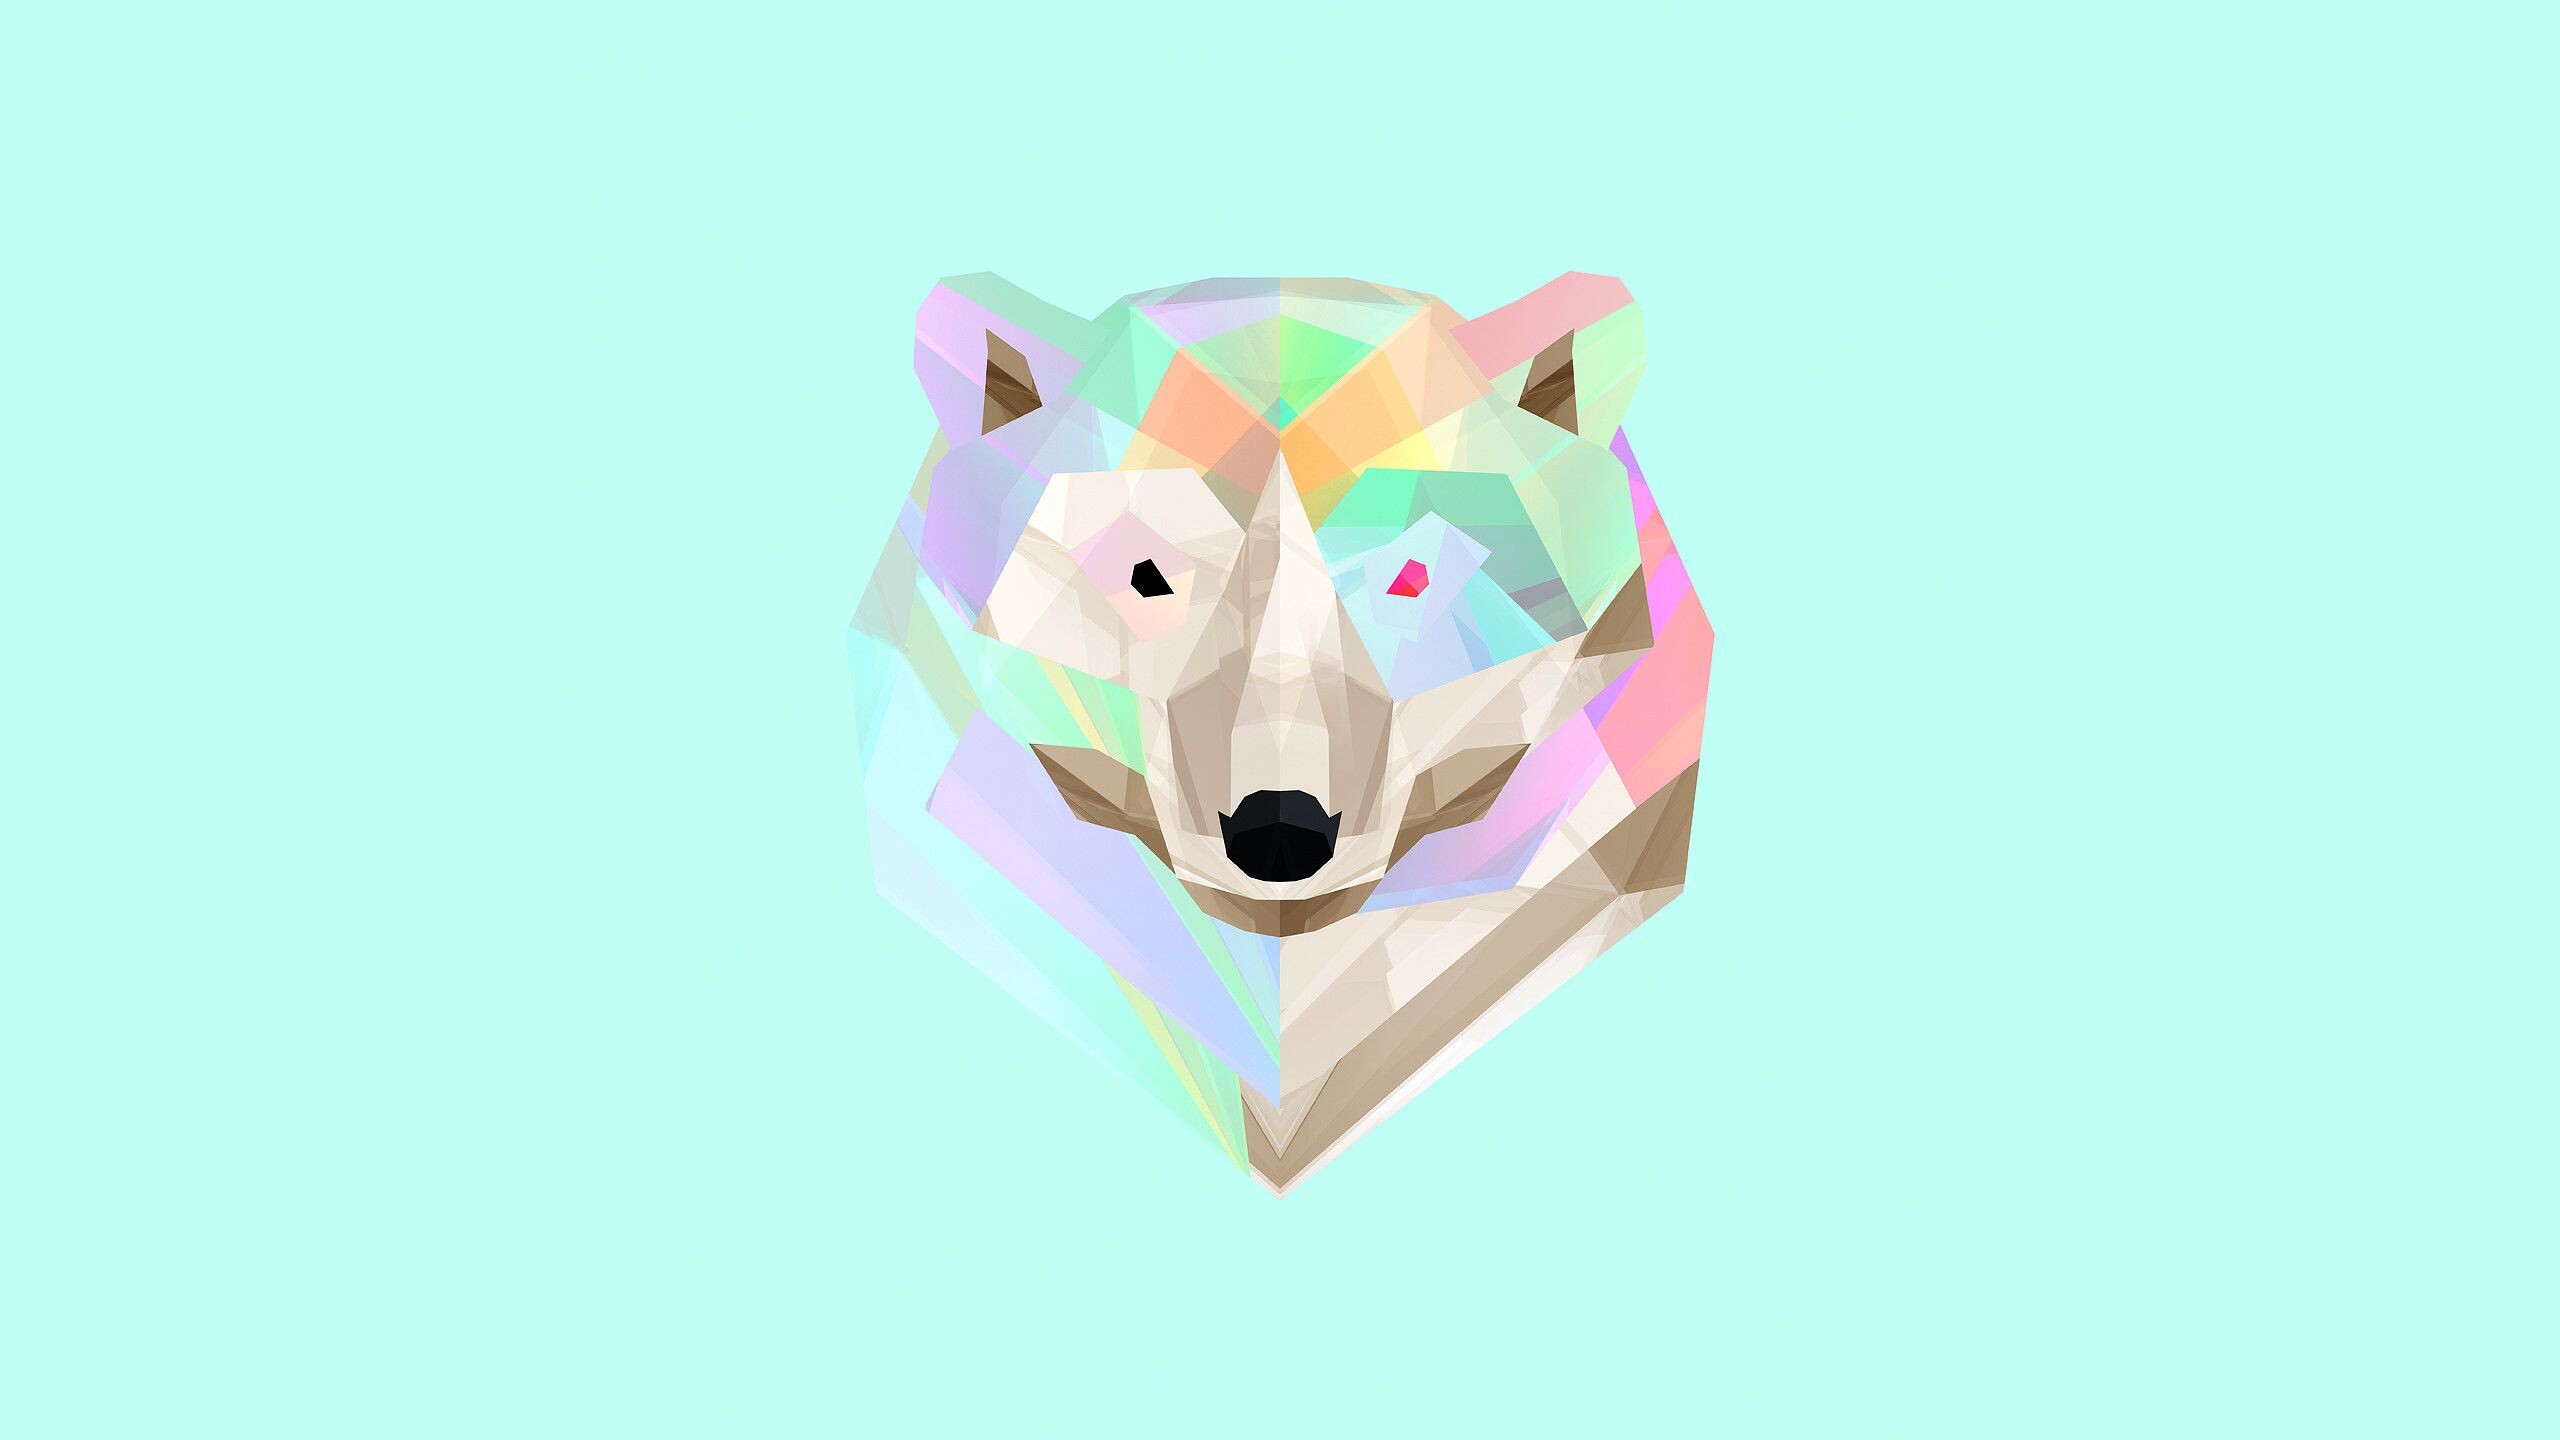 Geometric Animal: Art with straight lines and mathematical features and relationships, White bear. 2560x1440 HD Wallpaper.